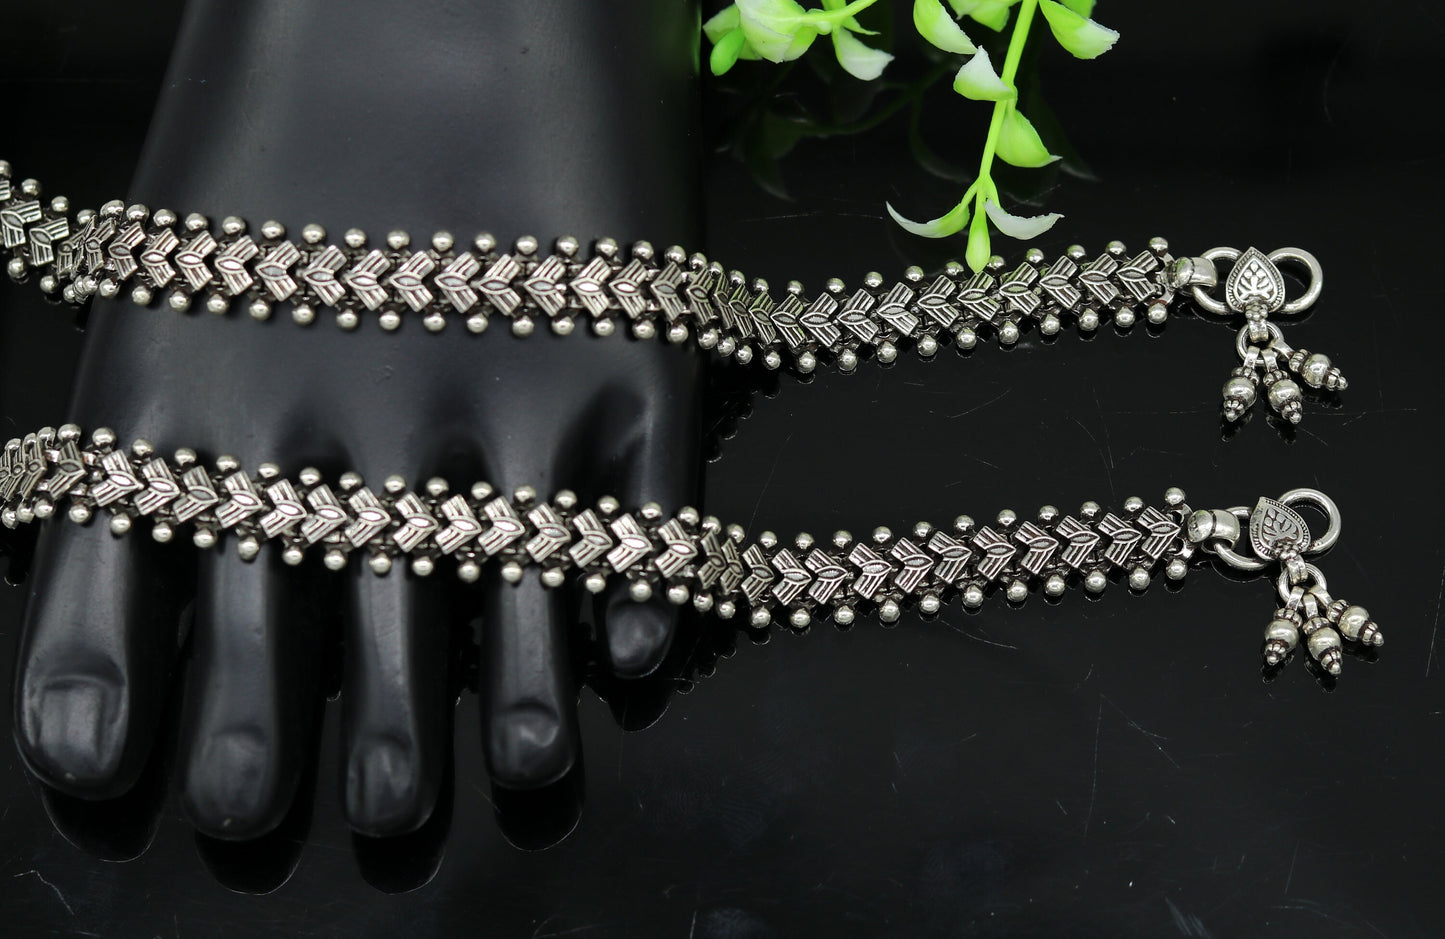 Indian Traditional cultural trendy 925 Sterling silver handmade anklets foot bracelet gift for women's chunky jewelry nank01 - TRIBAL ORNAMENTS